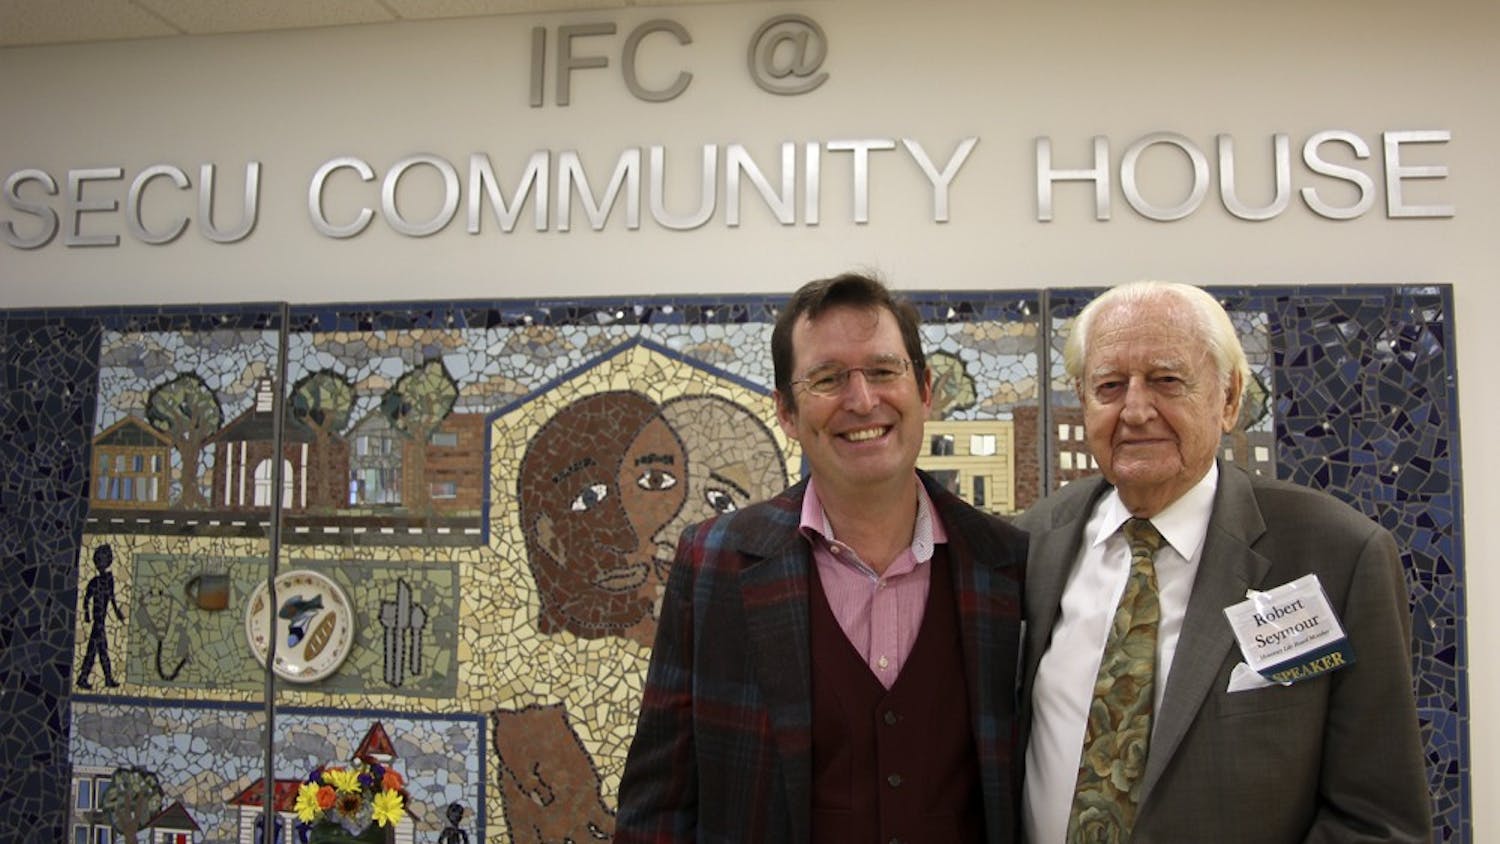 Inter-Faith Council opening house ceremony (Left, Michael Reinke, IFC Executive Director; Right, Robert Seymour, IFC Honorary Life Board Member)